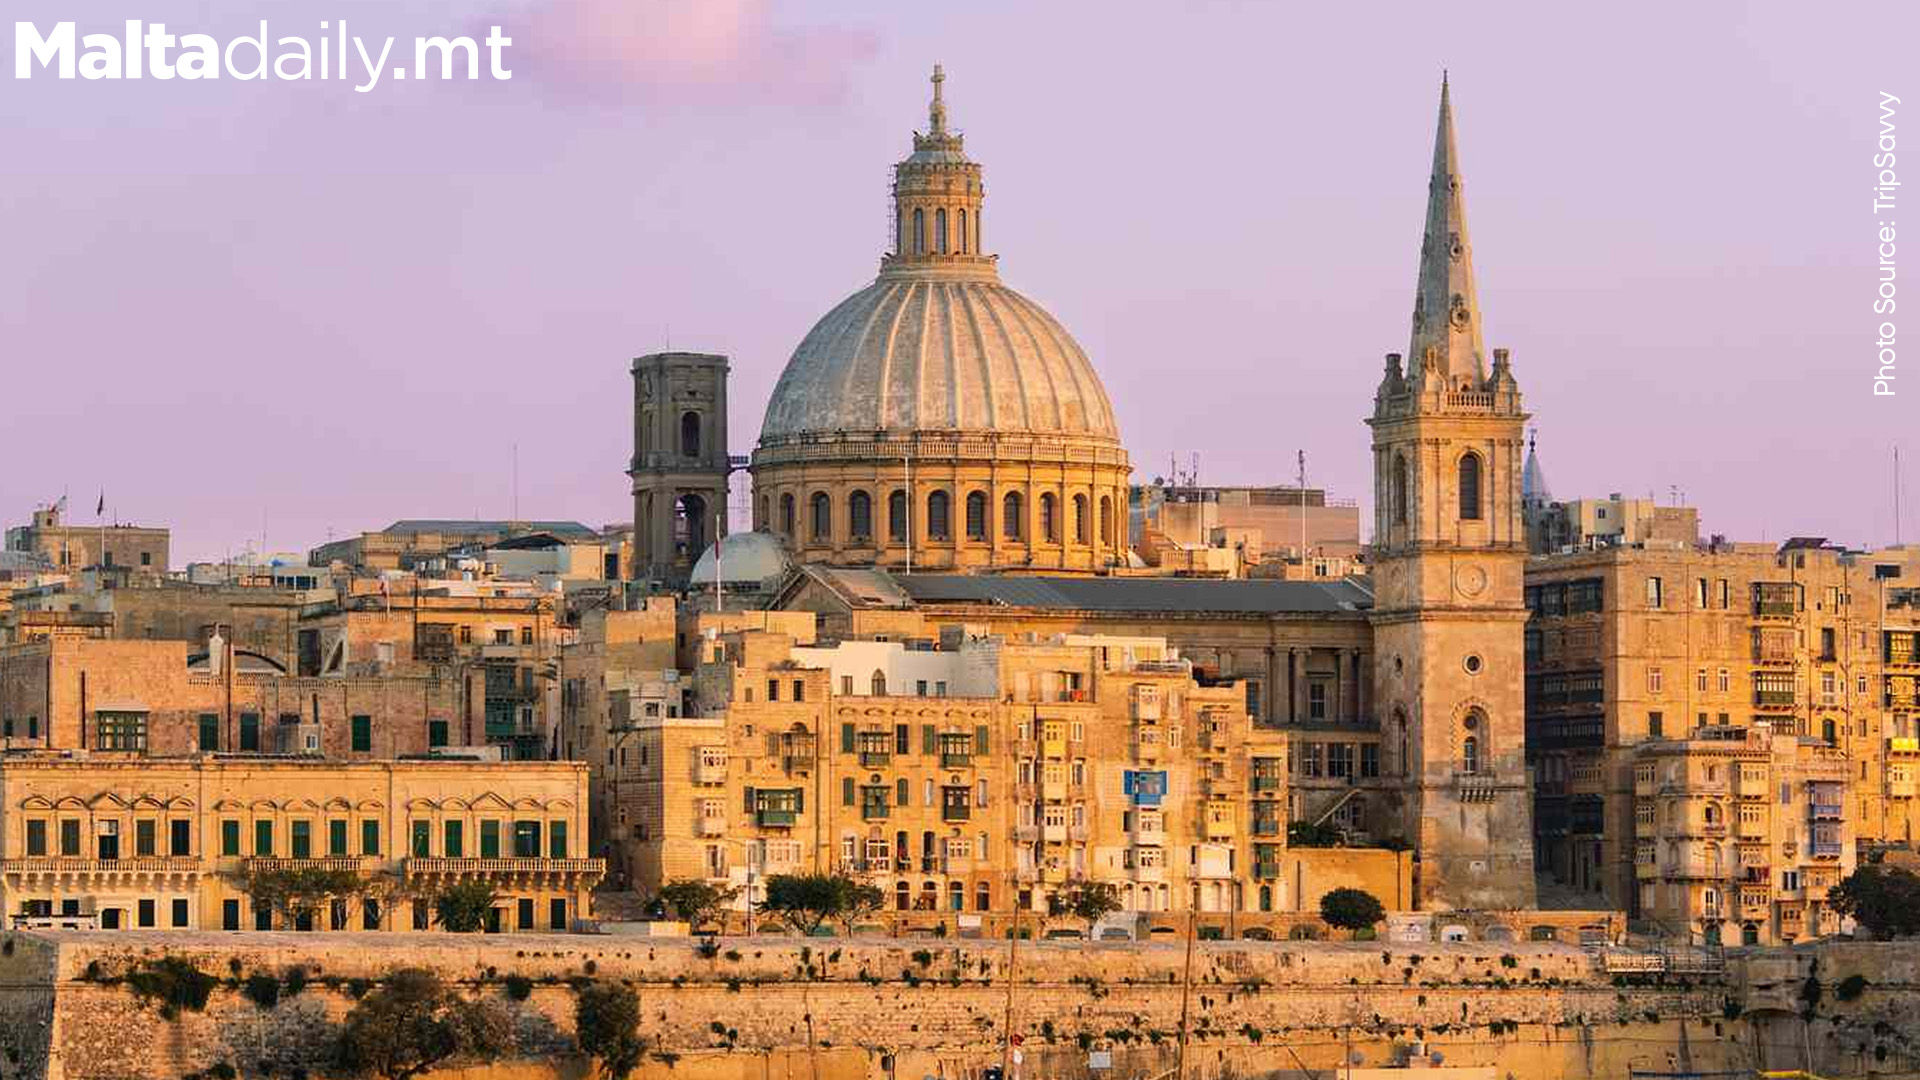 Valletta Makes It In Top 10 Best Smelling Cities In The World